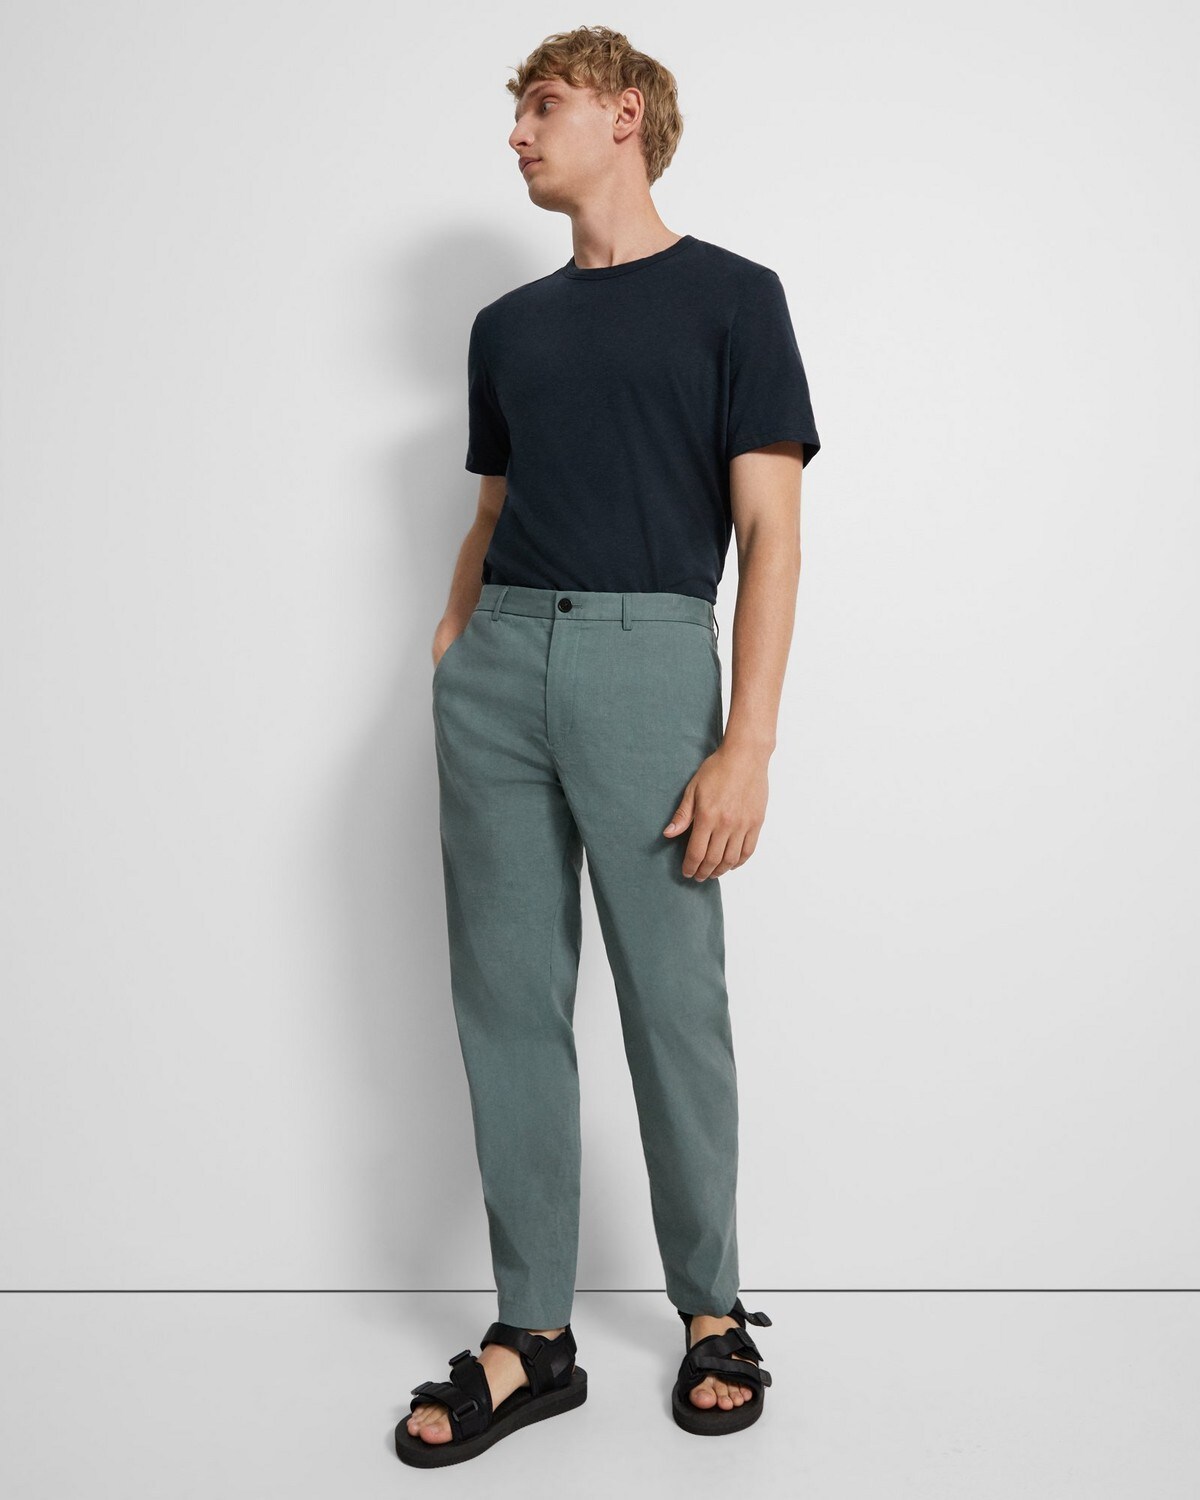 Curtis Pant in Good Linen